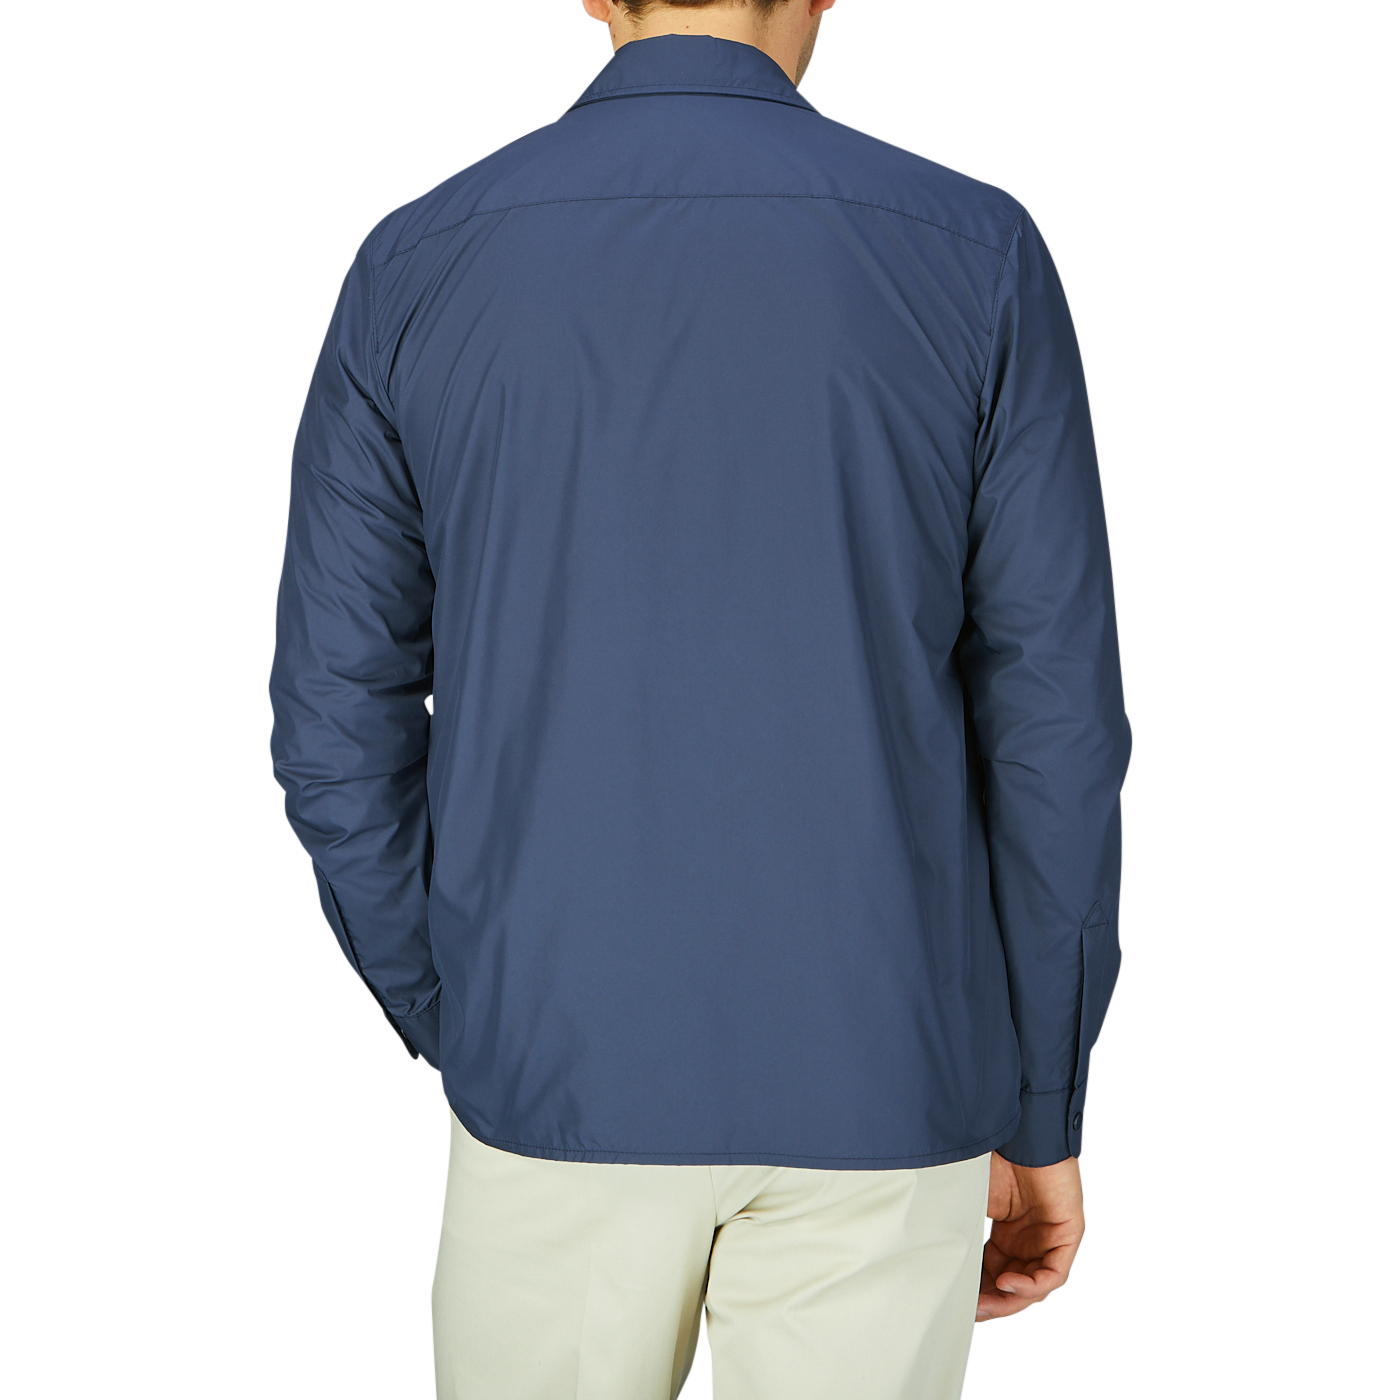 Man wearing a Mazzarelli navy blue nylon water resistant overshirt and light-colored pants from behind.